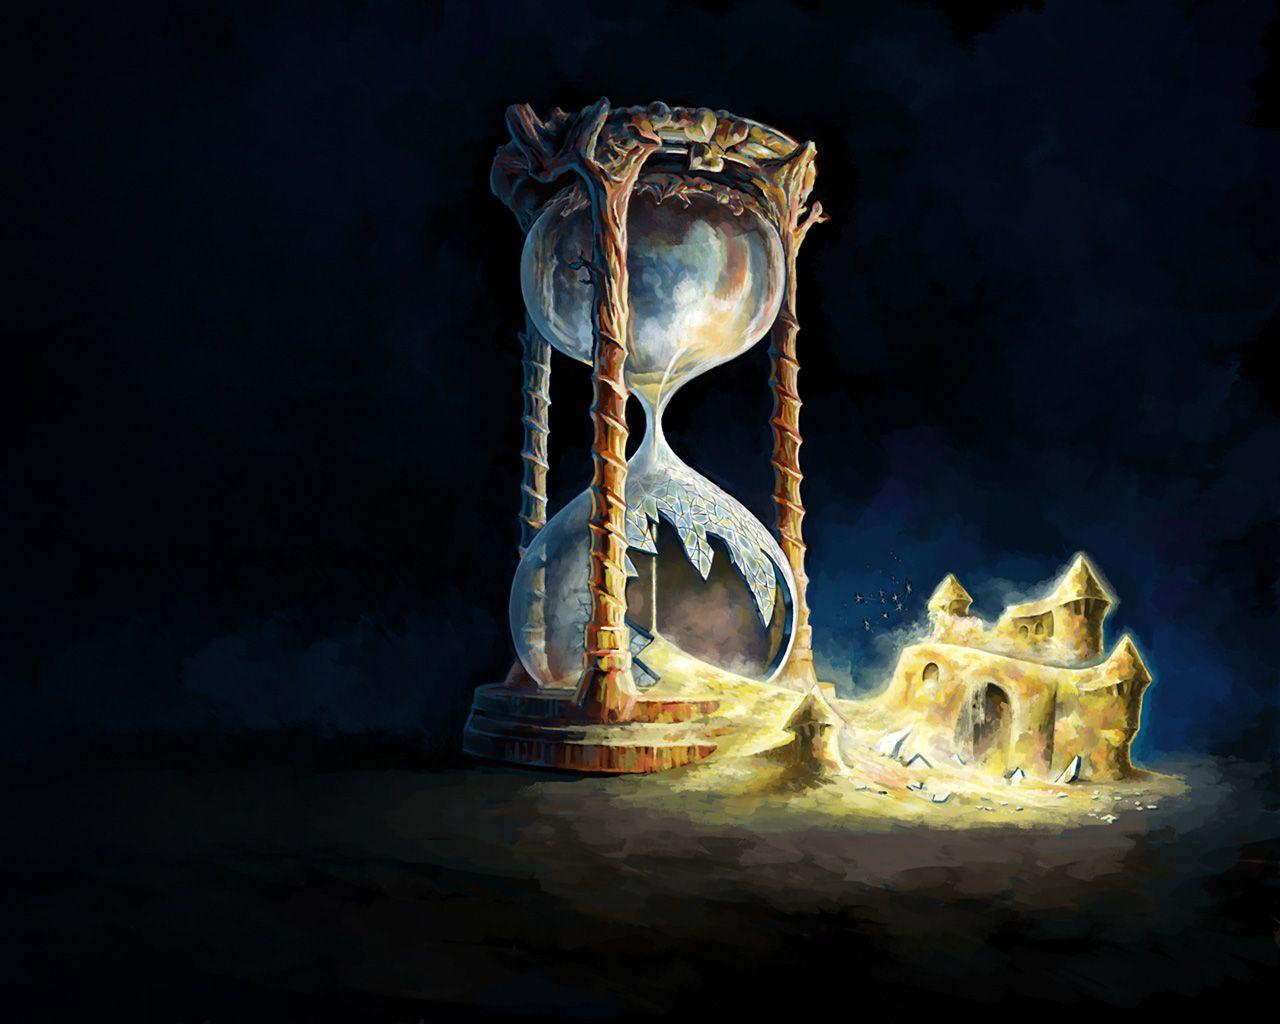 COOL IMAGES: 3D Hourglass Picture